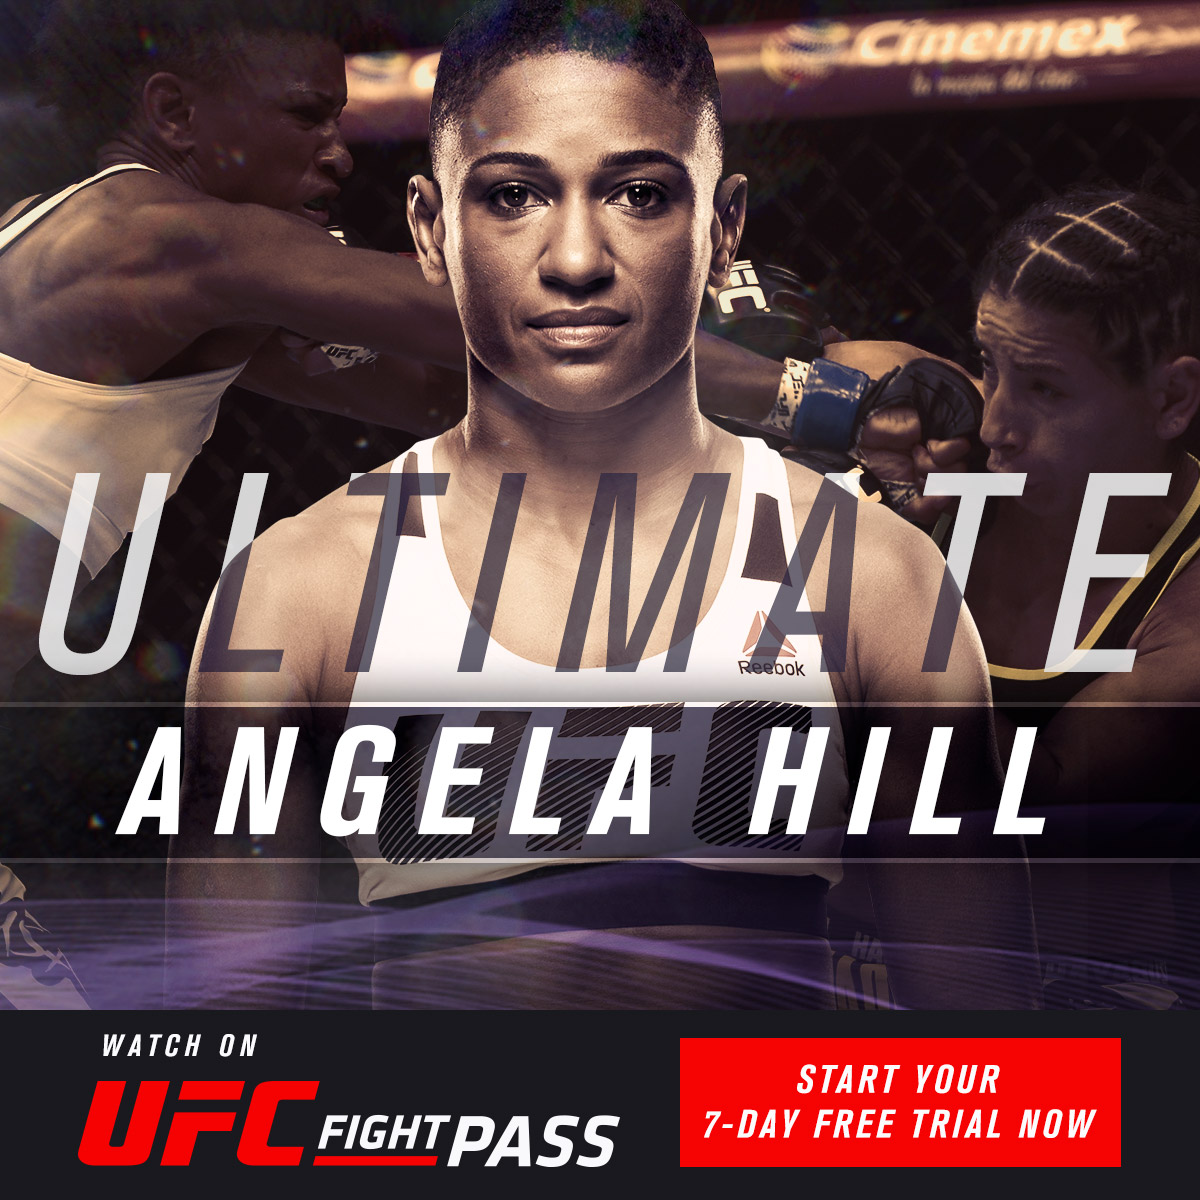 Watch the Ultimate Angela Hill collection now on UFC FIGHT PASS, including Hill's win over Livia Renata Souza for the Invicta FC strawweight title, which is free this week on FIGHT PASS.